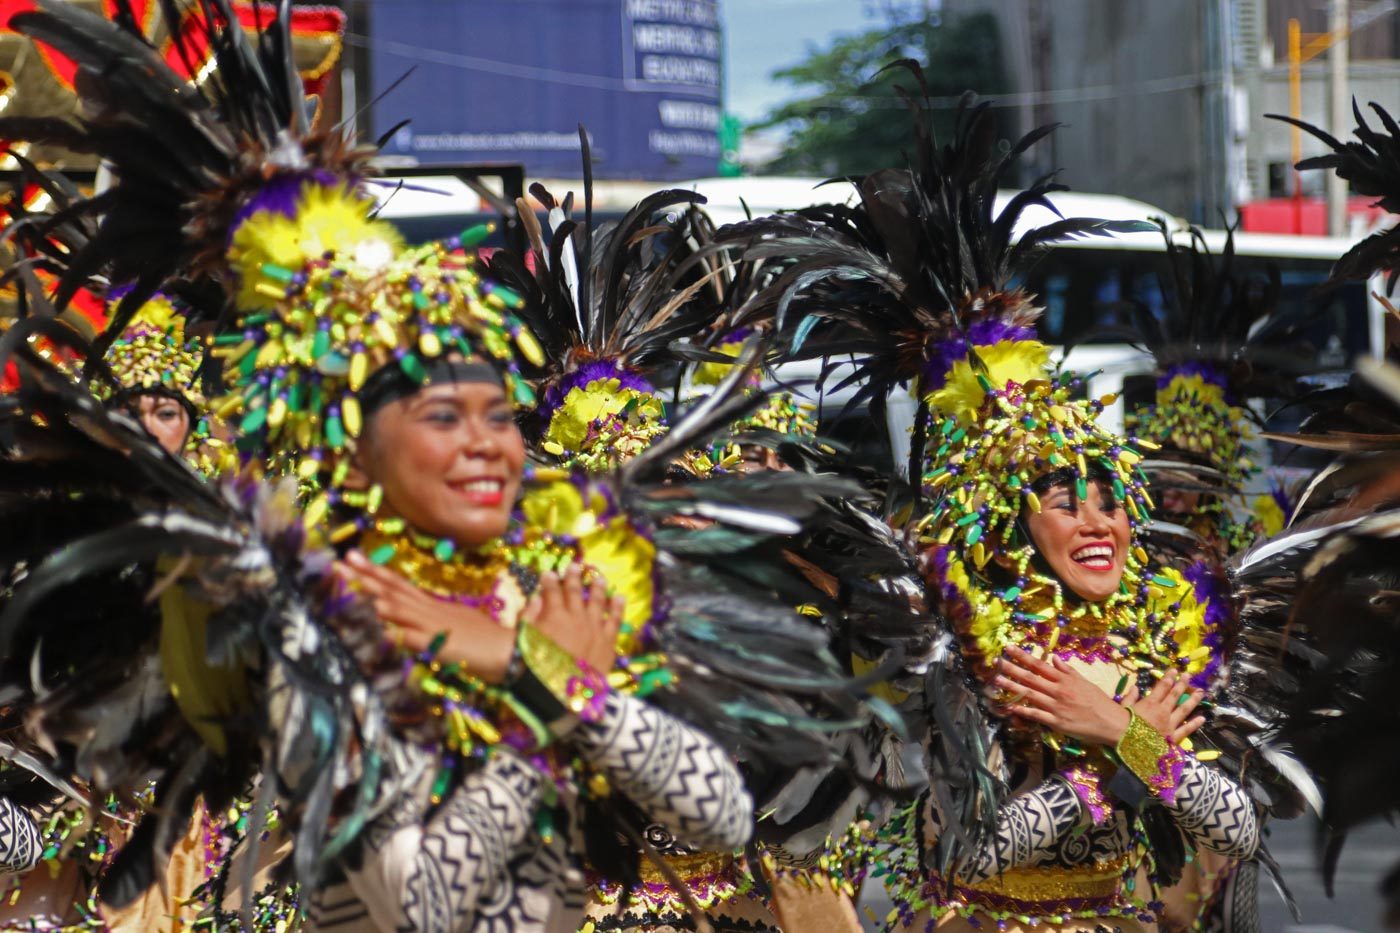 Signal shutdown to proceed during Sinulog 2020 events